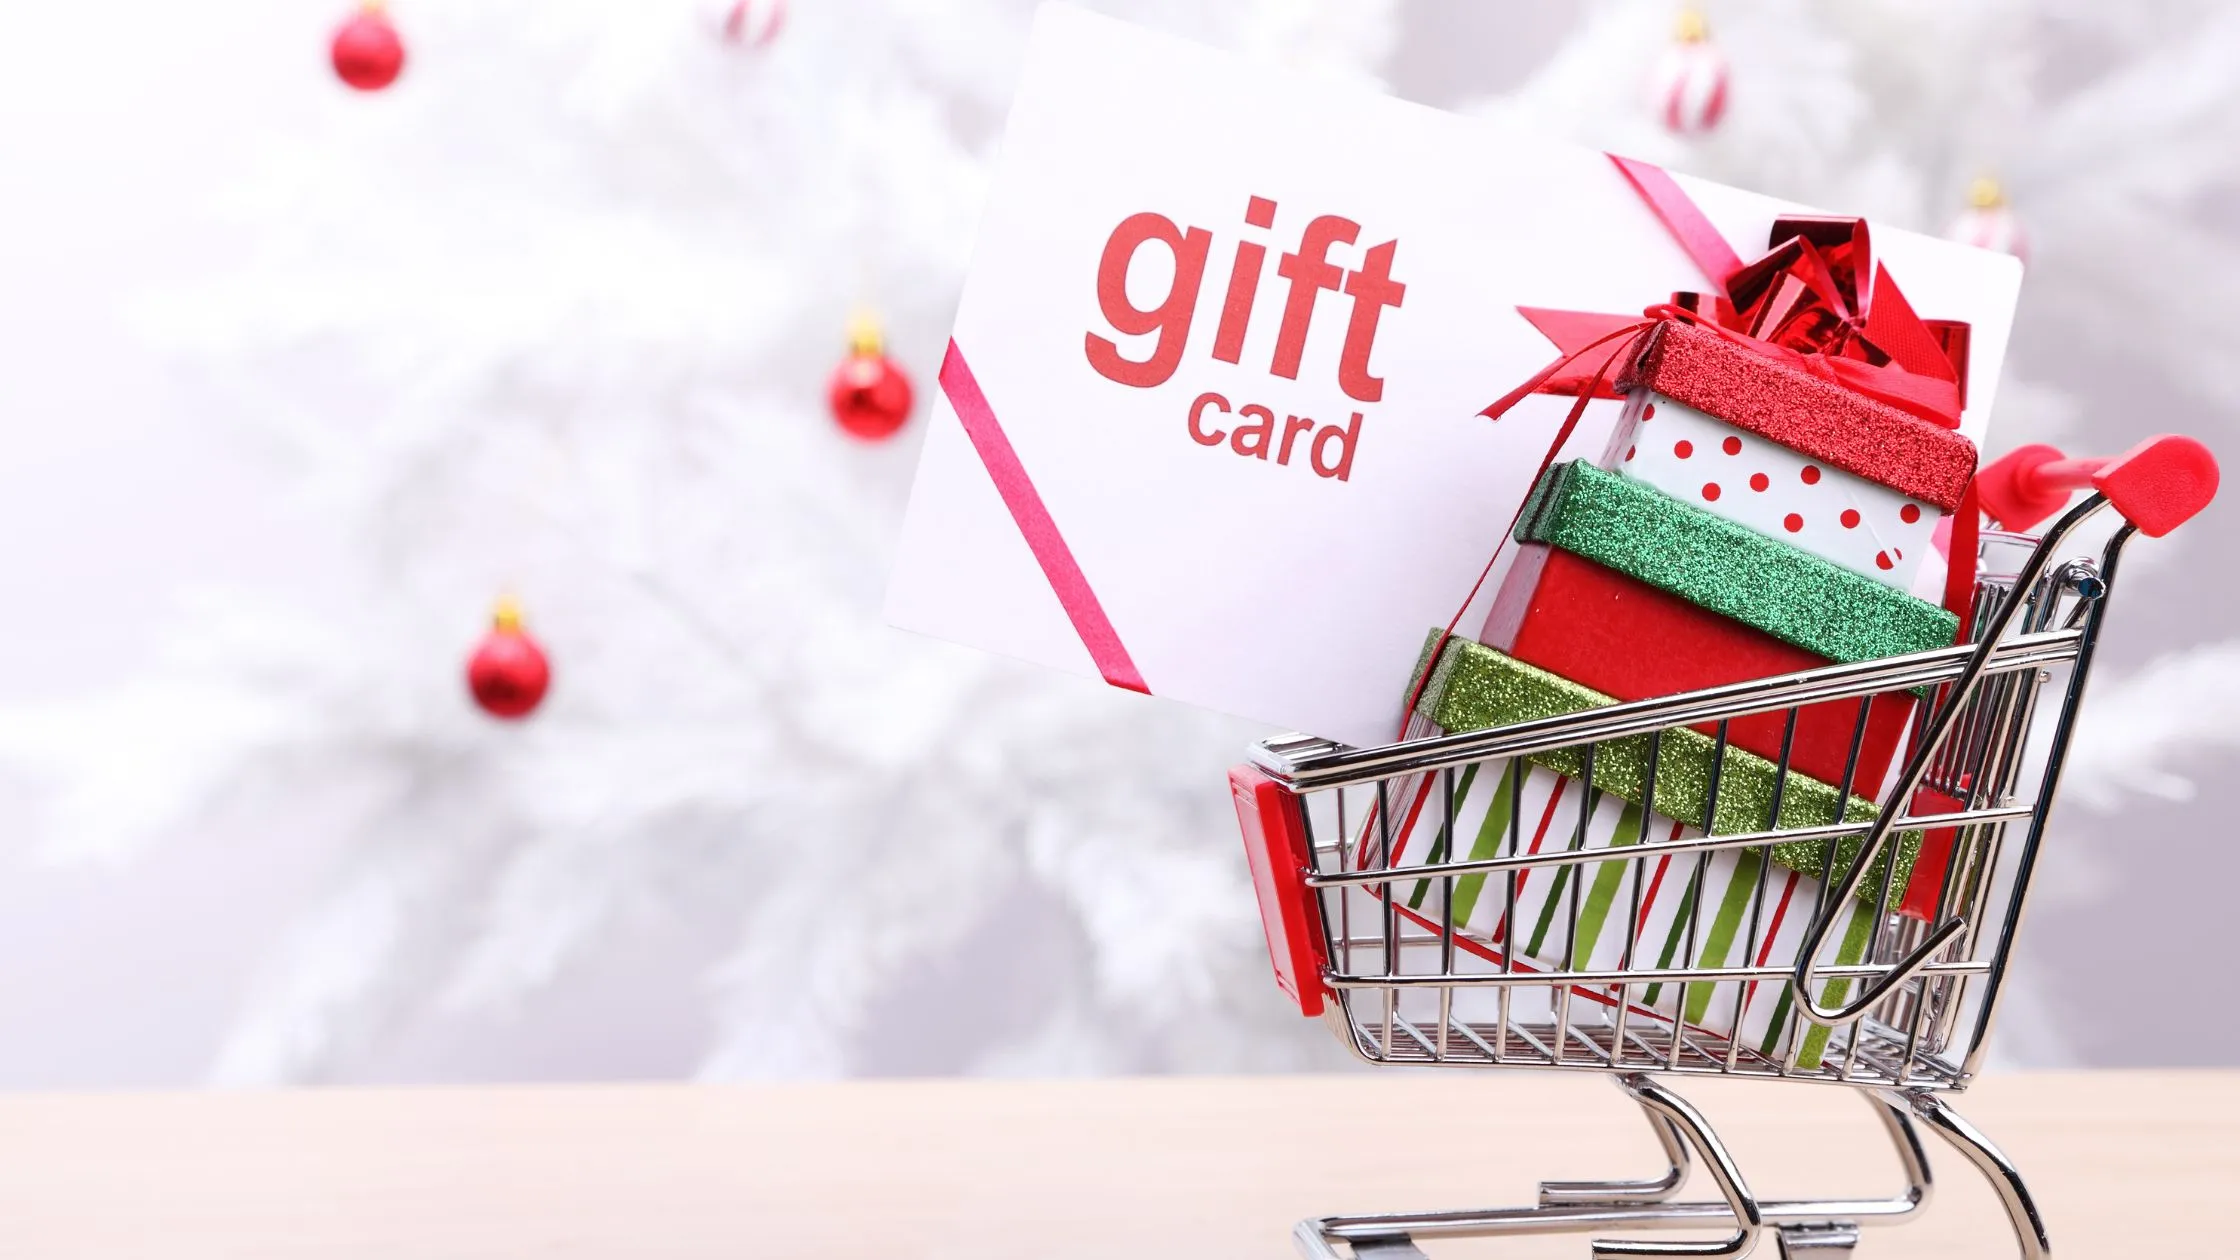 Black Friday Deals On Gift Cards